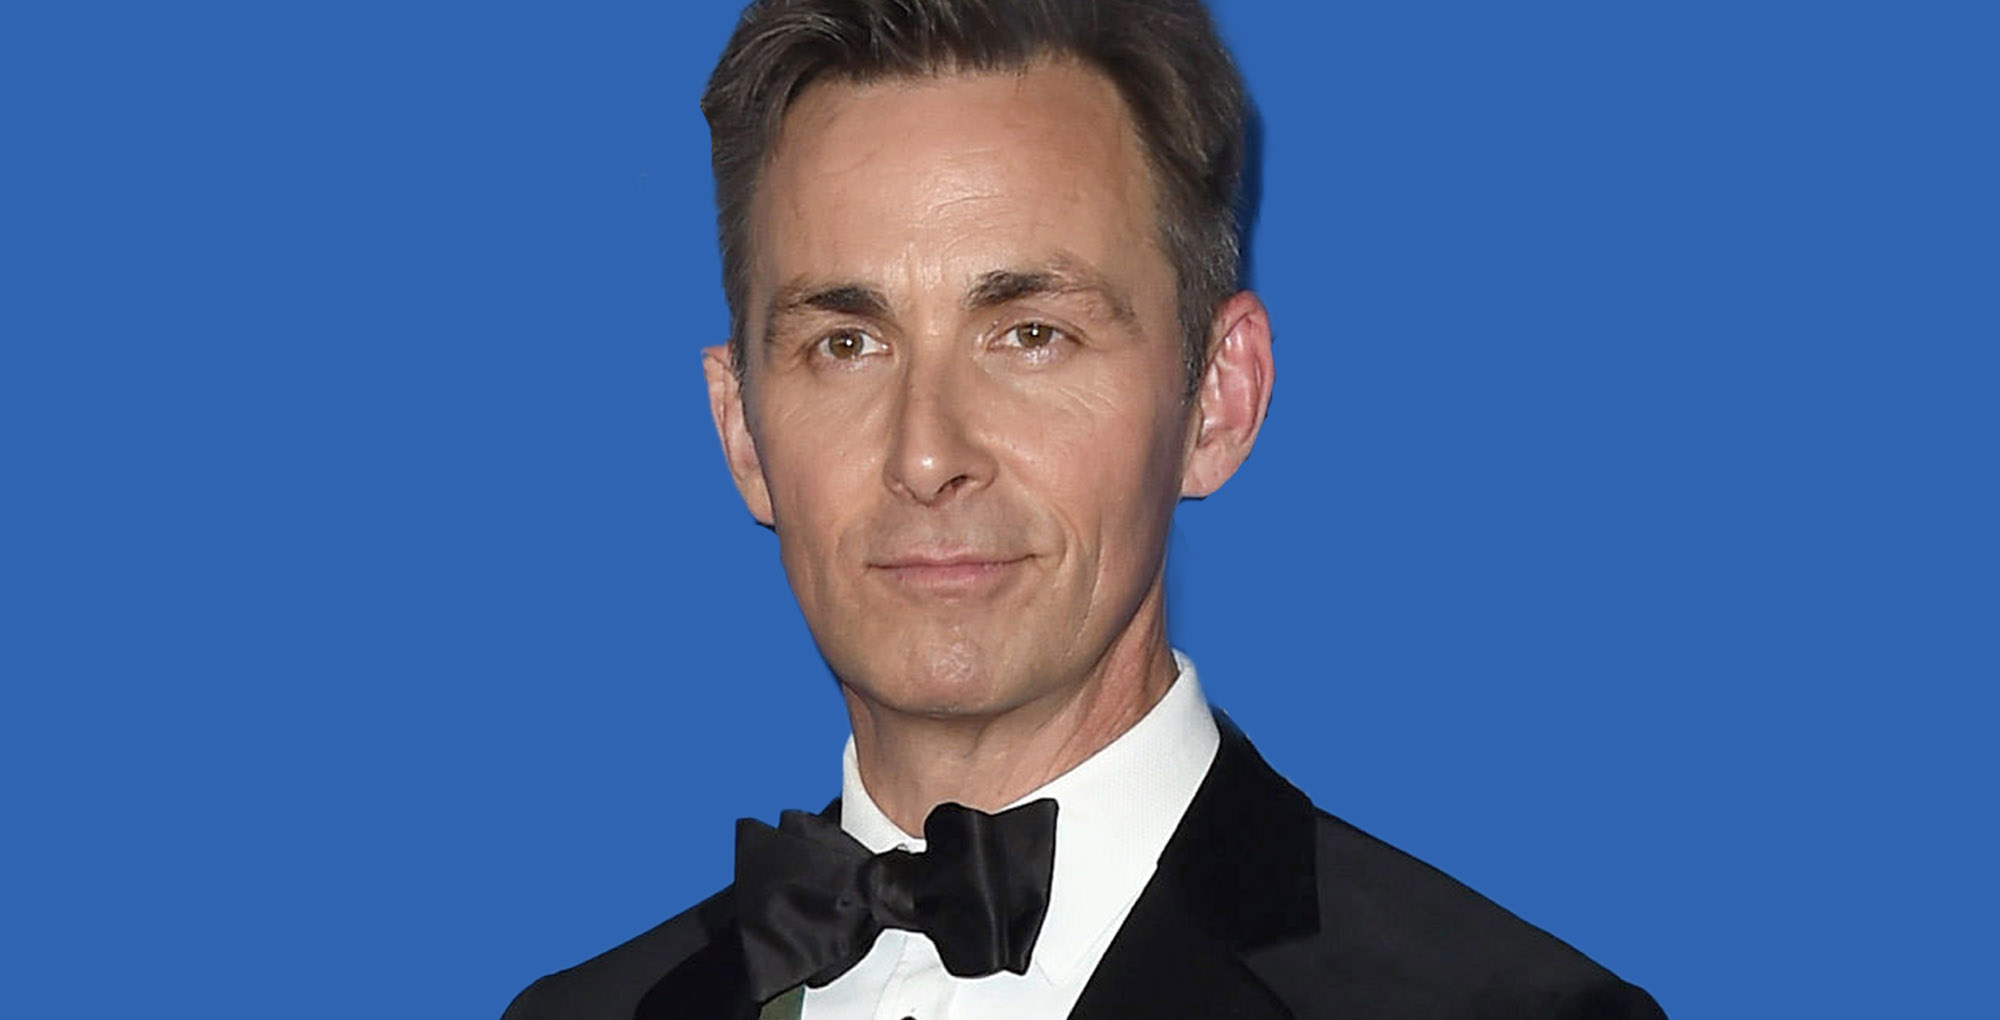 james patrick stuart learned a lesson early on at general hospital.